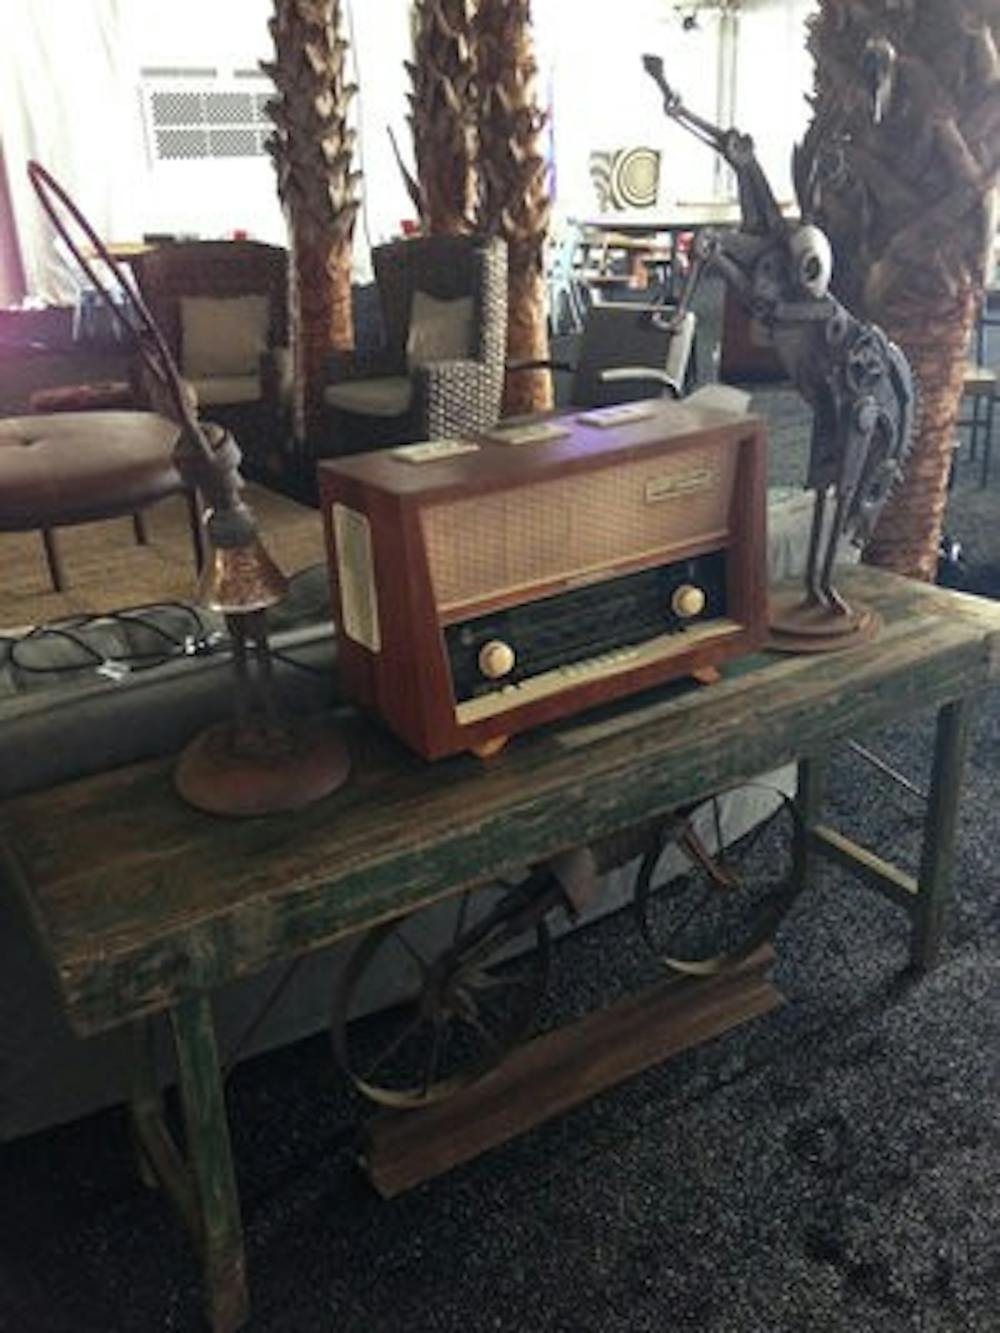 Students turned vintage radios into charging stations and placed them in all of the artists' trailers. (Contributed by Lindsay Weeks)